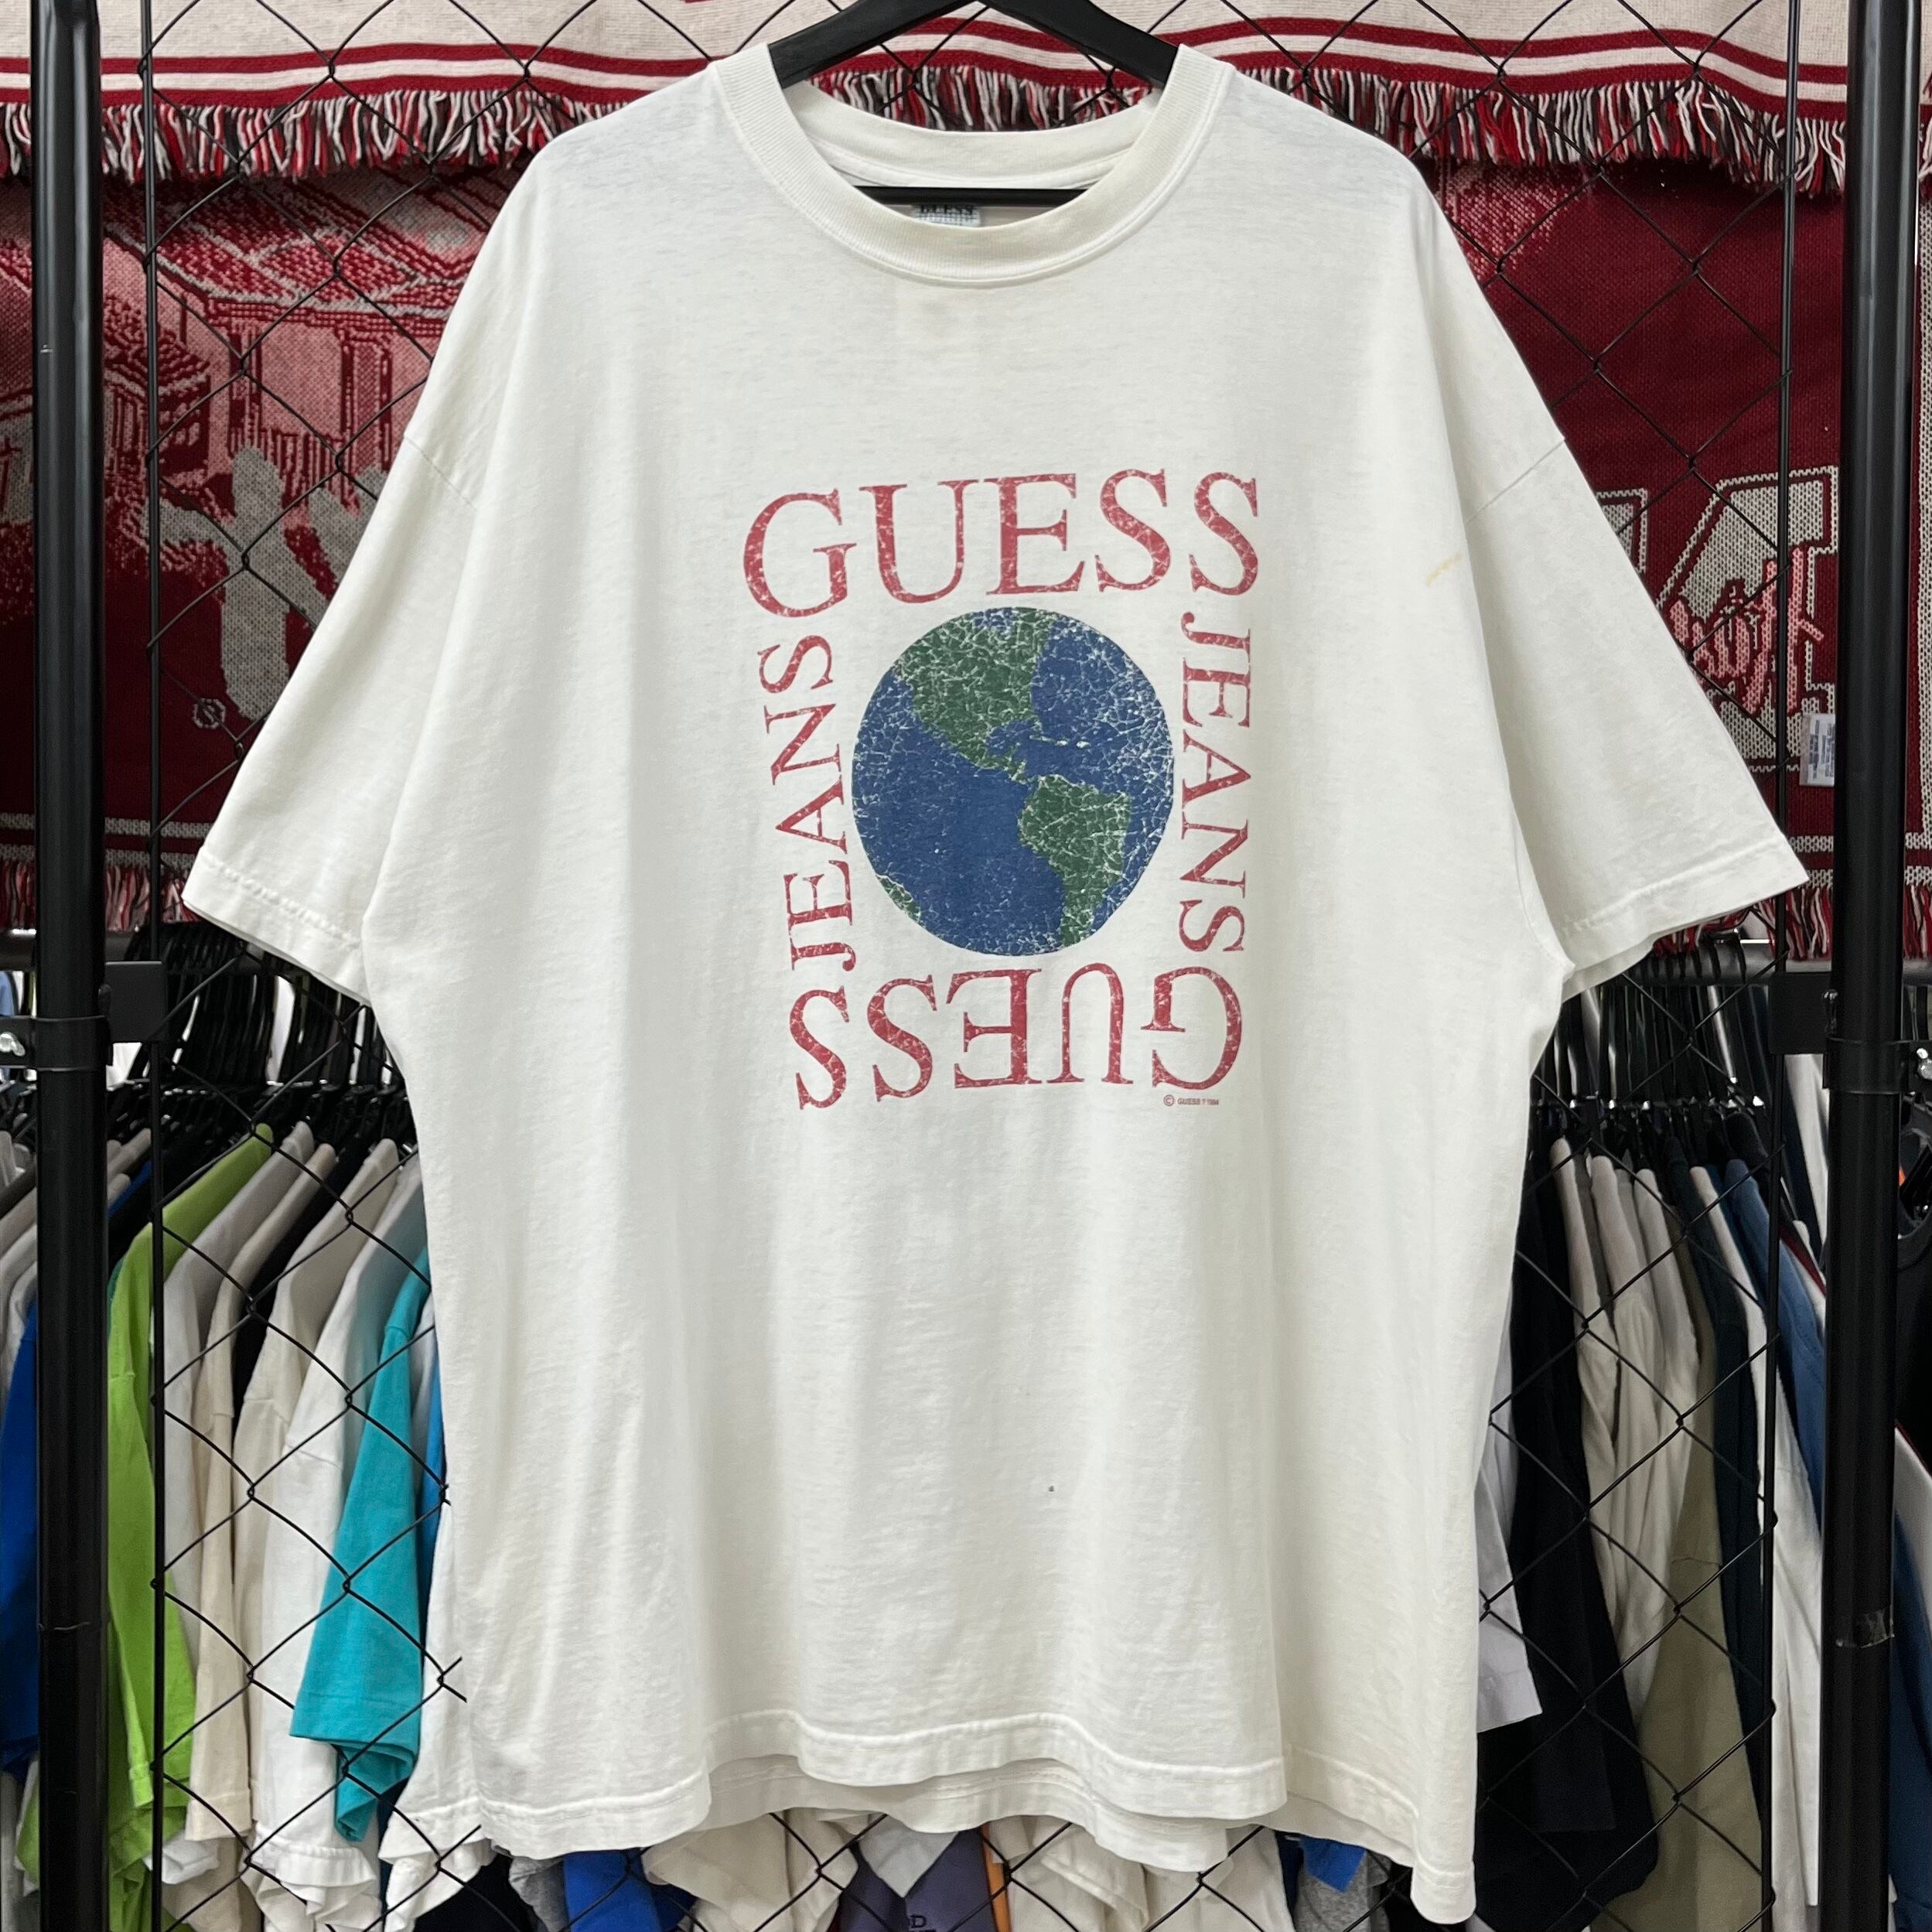 90s GUESS 半袖Tシャツ デザインプリント XL 古着 古着屋 埼玉 